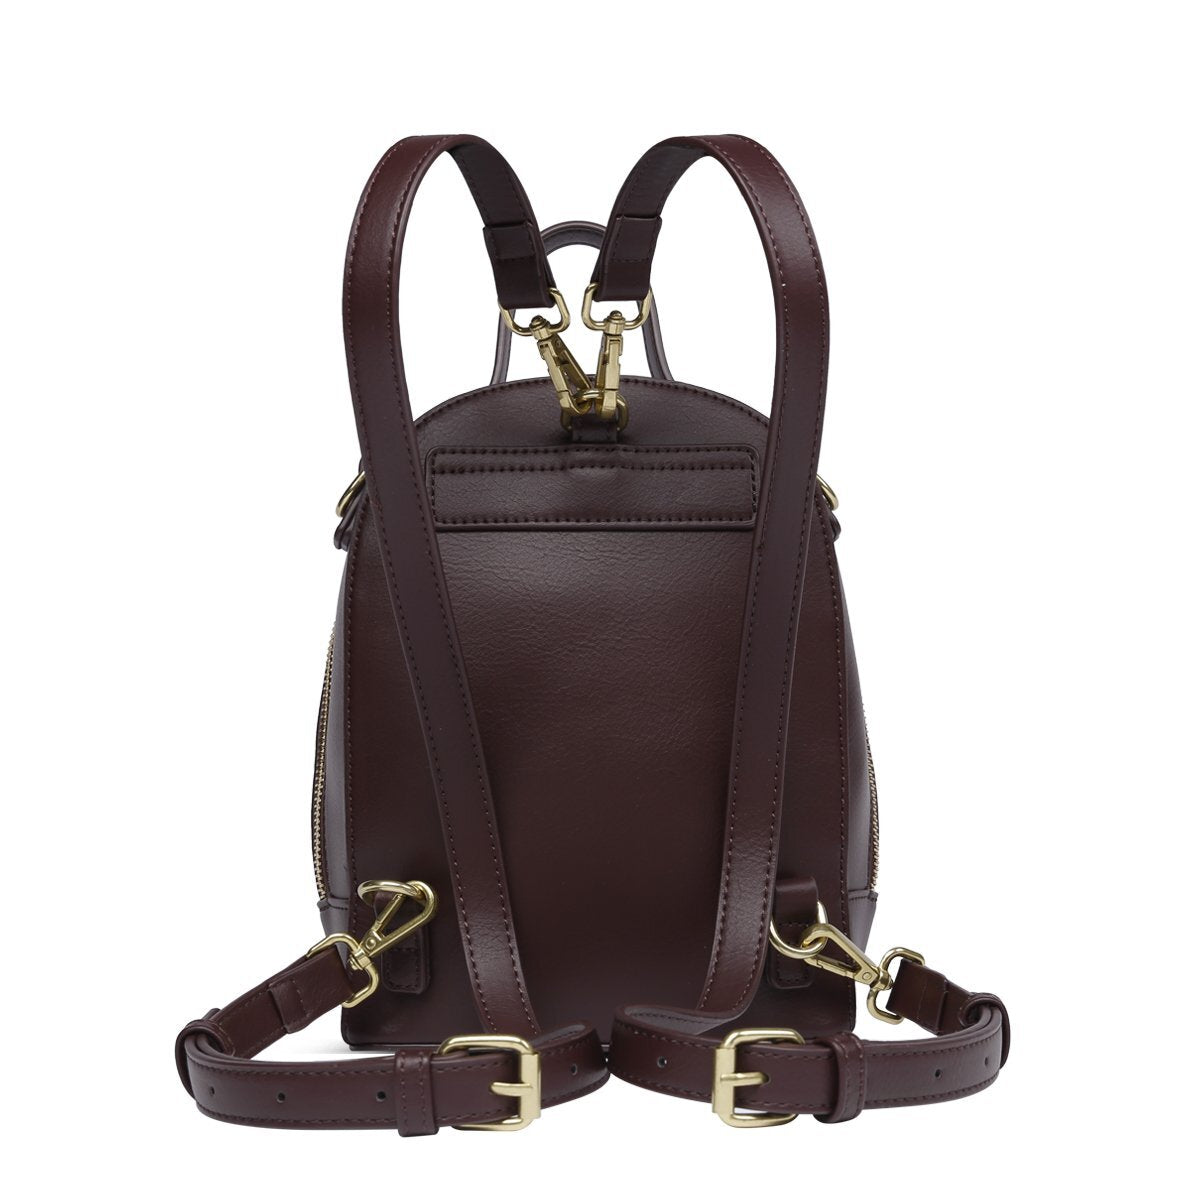 PM Cora BackPack Small Wine